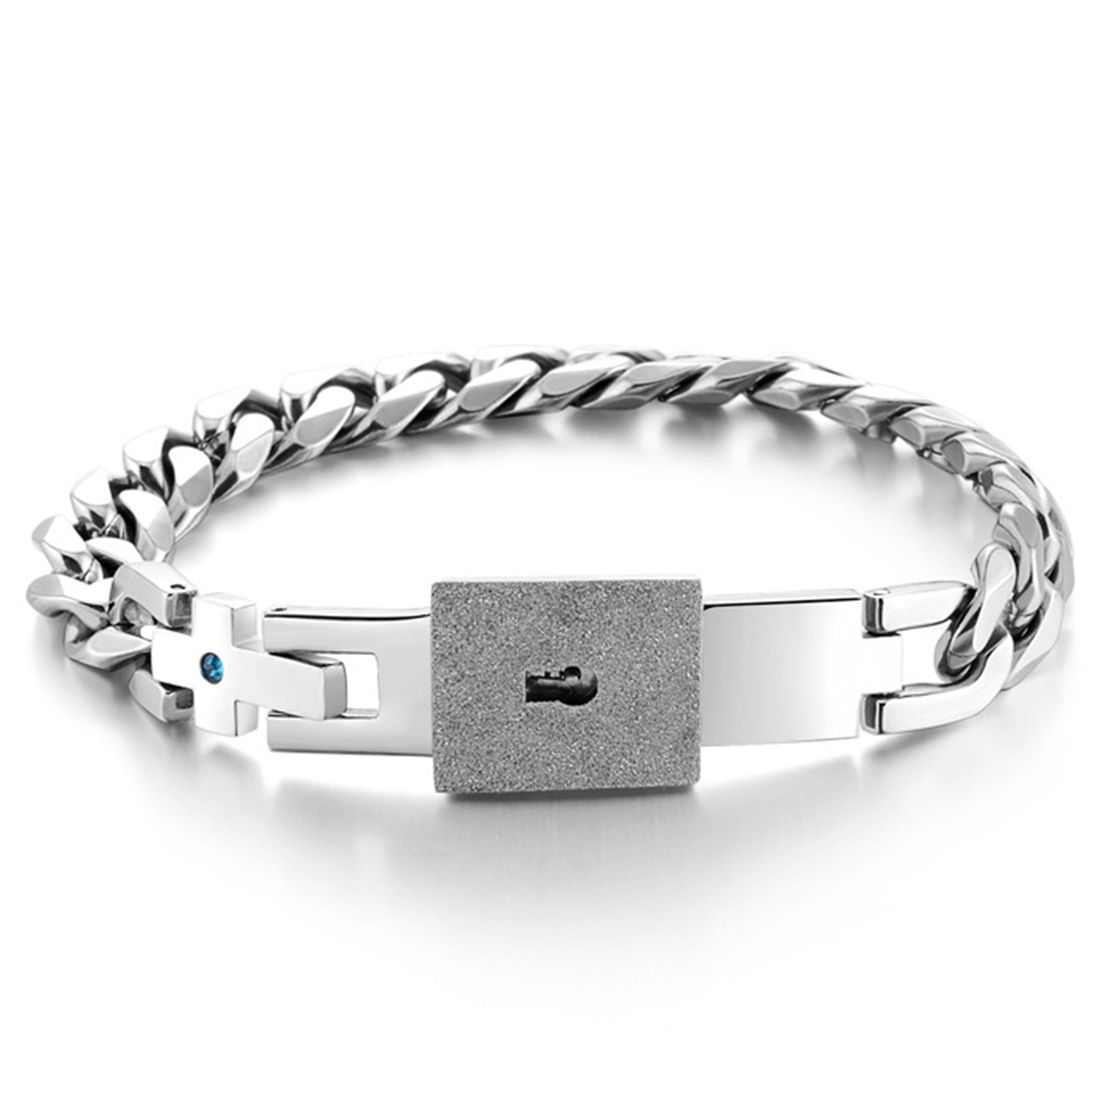 Buy Peora Stainless Steel Chain Bracelet Fashion Jewelry for Boys Him and  Men at Amazonin